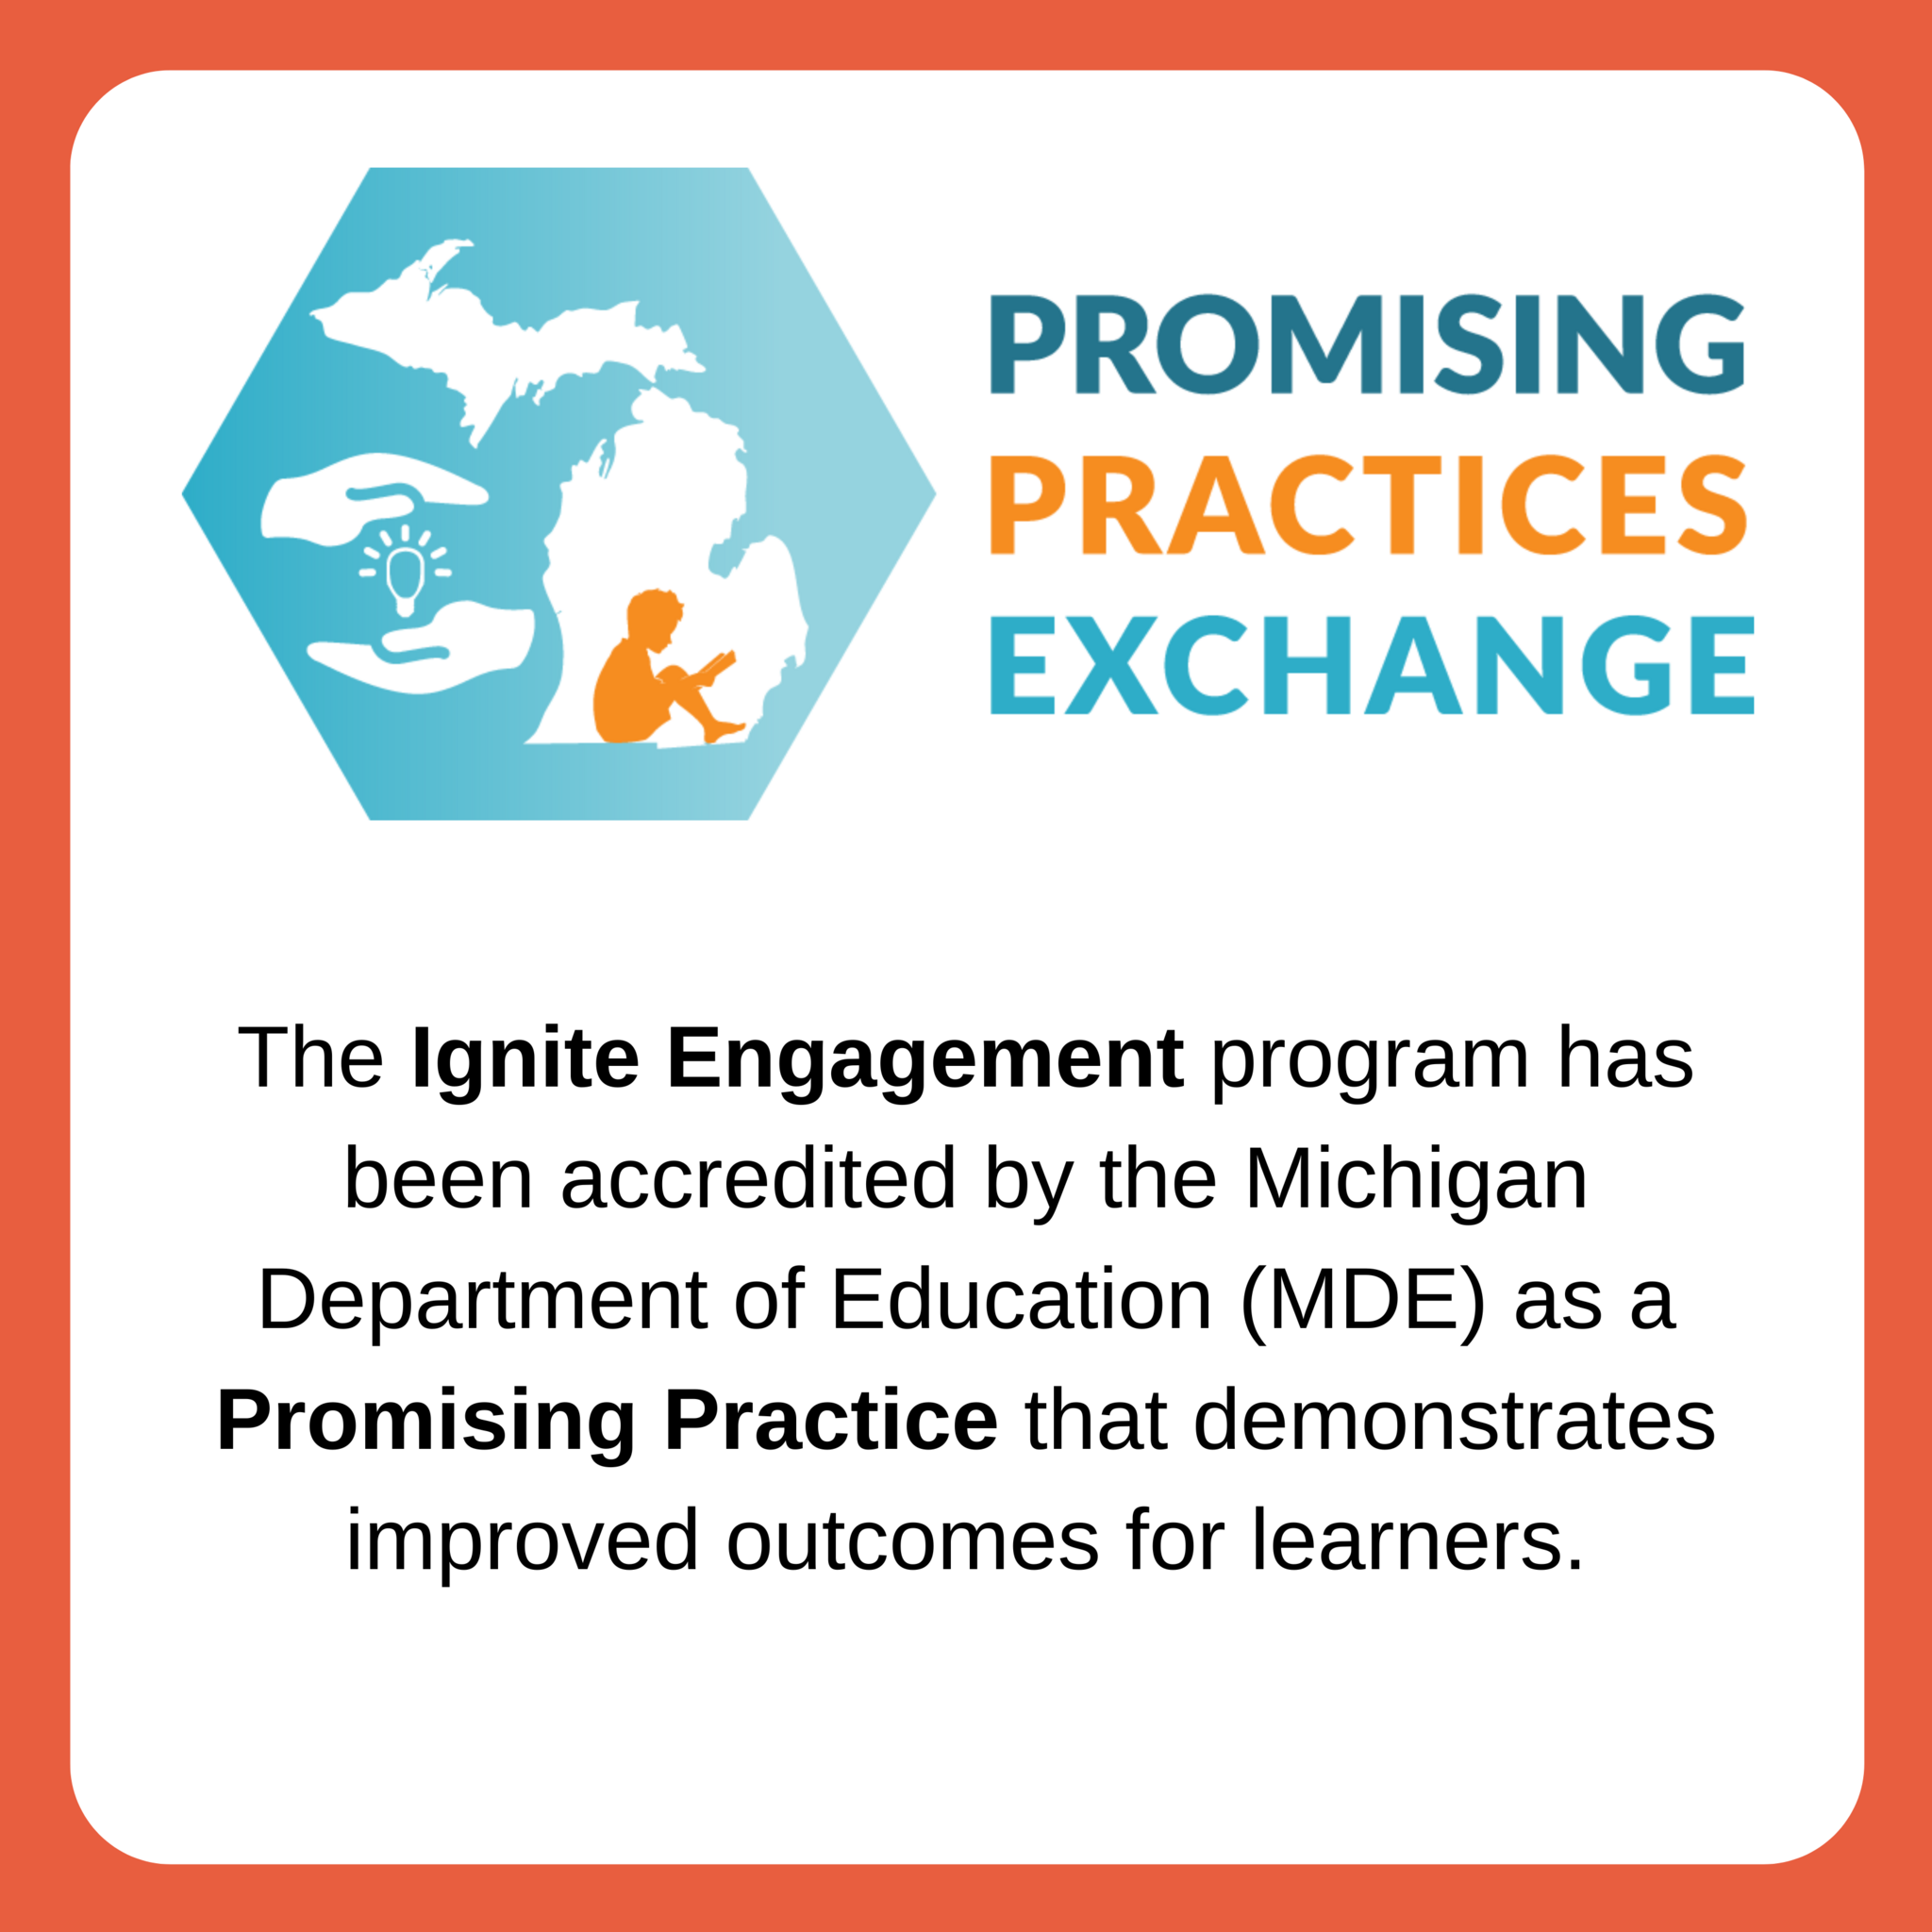 Promising Practices Exchange. The Ignite Engagement program has been accredited by the Michigan Department of Education (MDE) as a Promising Practice that demonstrates improved outcomes for learners.